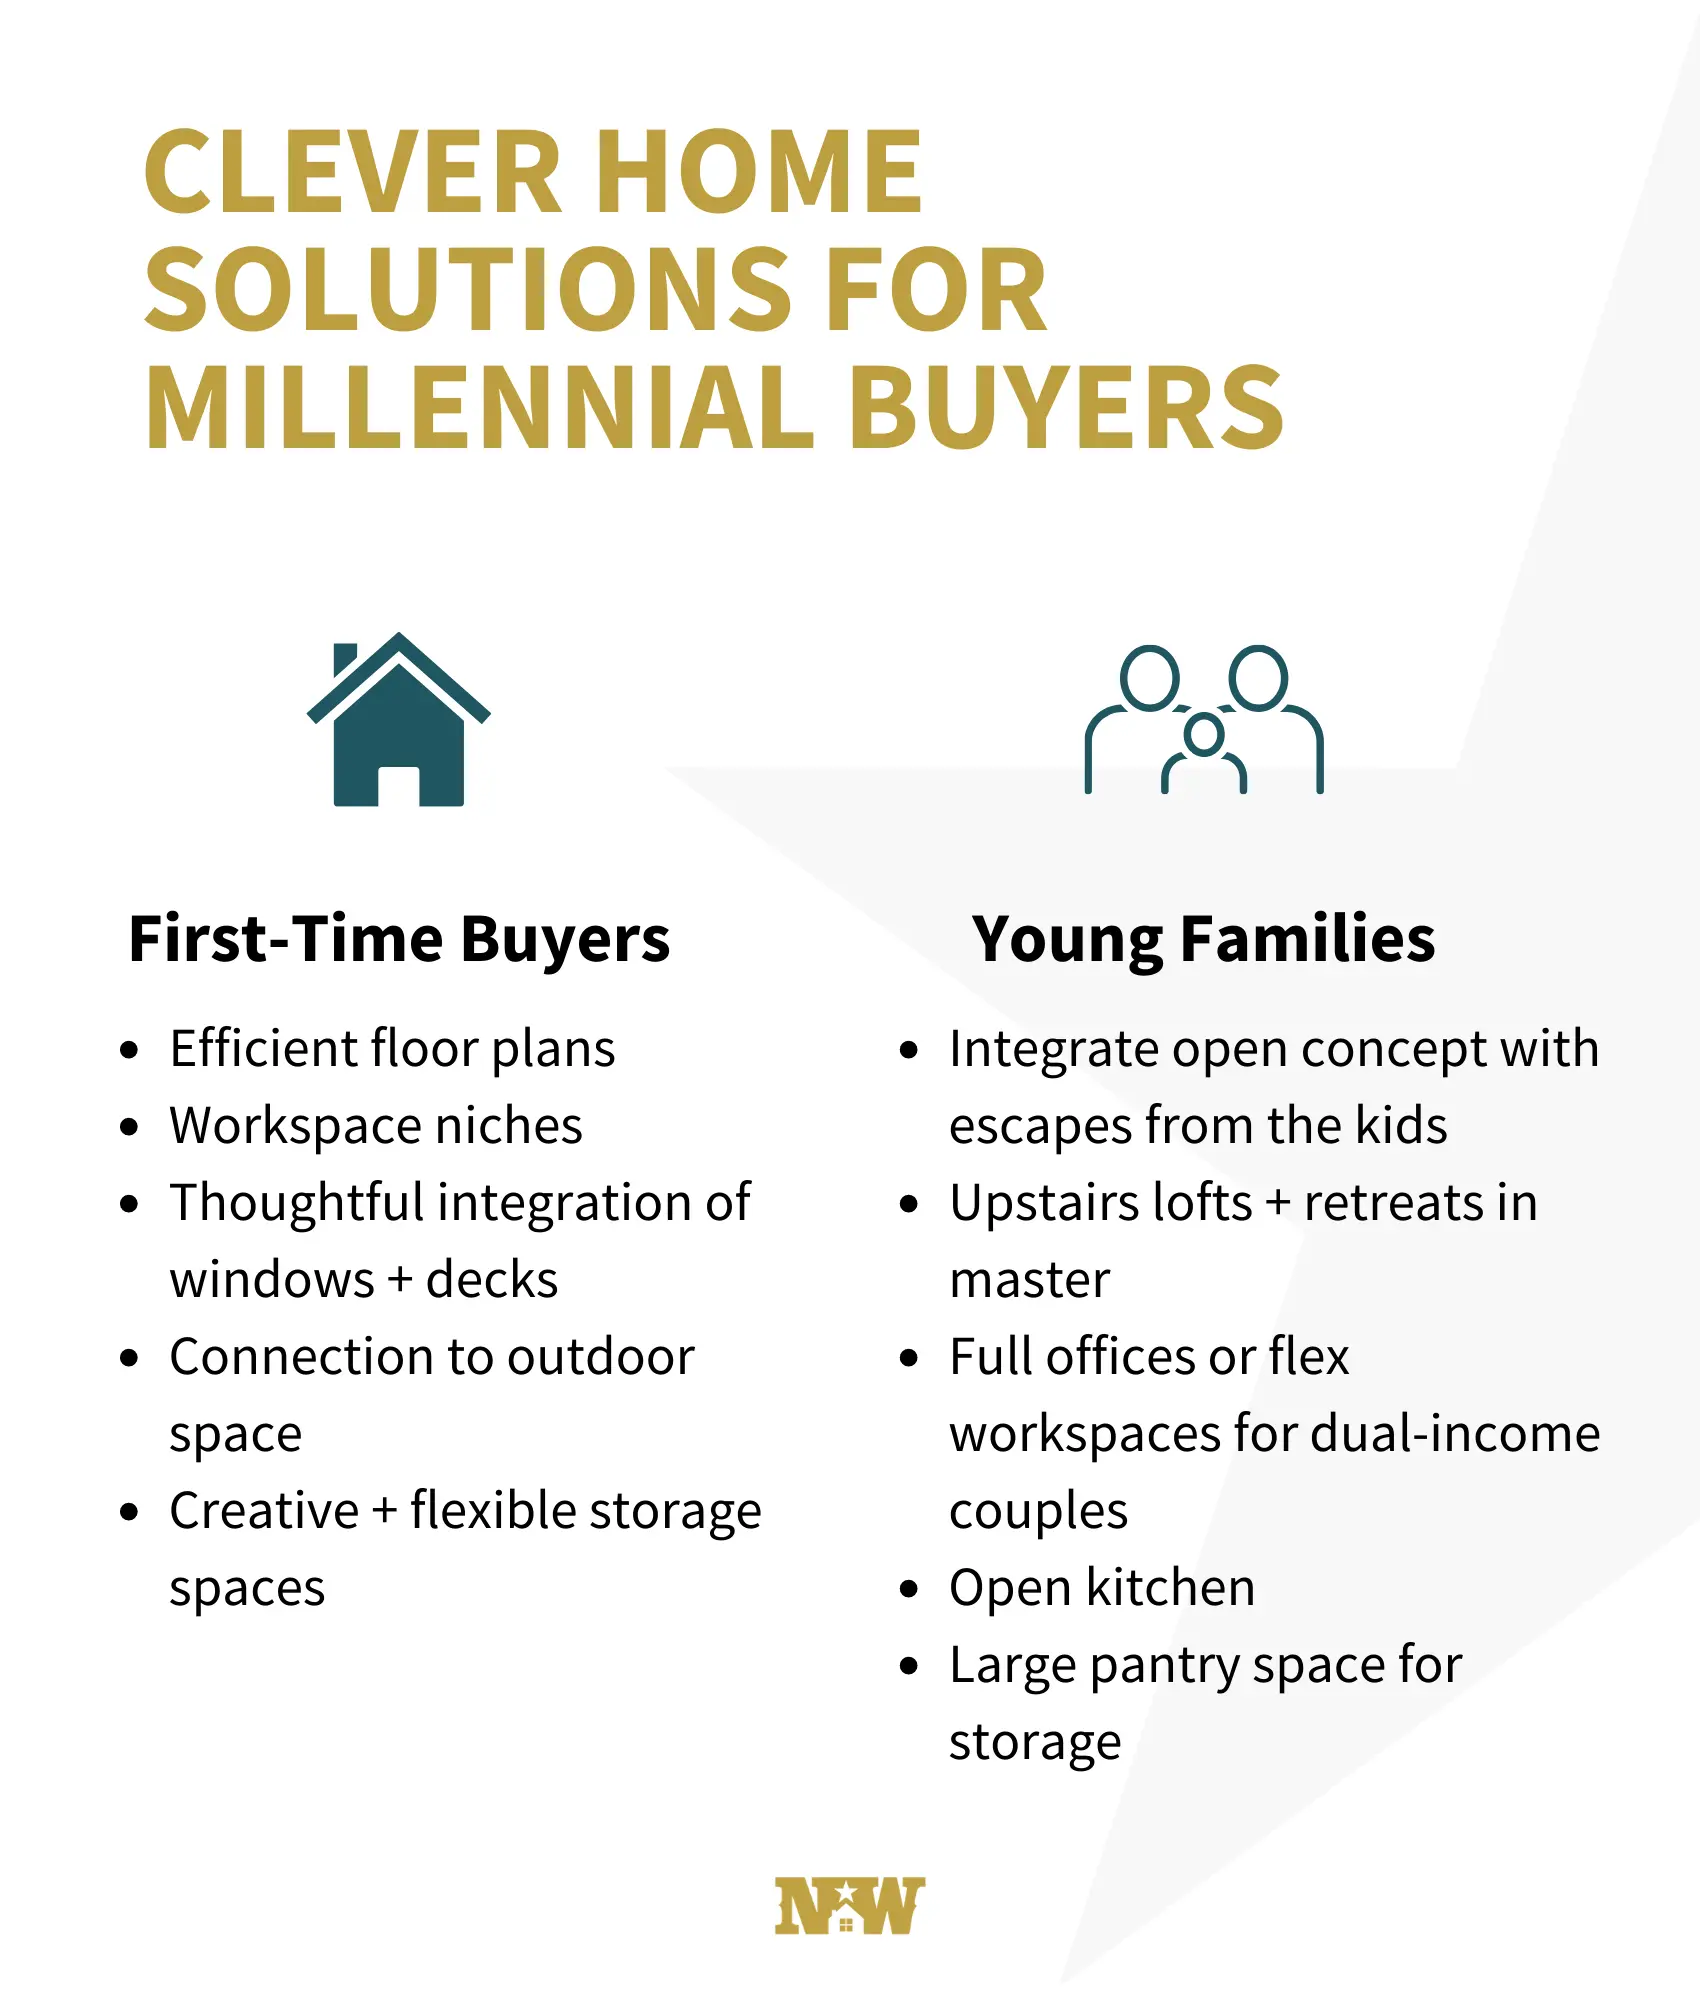 https://www.newwestern.com/wp-content/uploads/2023/01/Clever-Home-Solutions-for-Millennial-Buyers.png